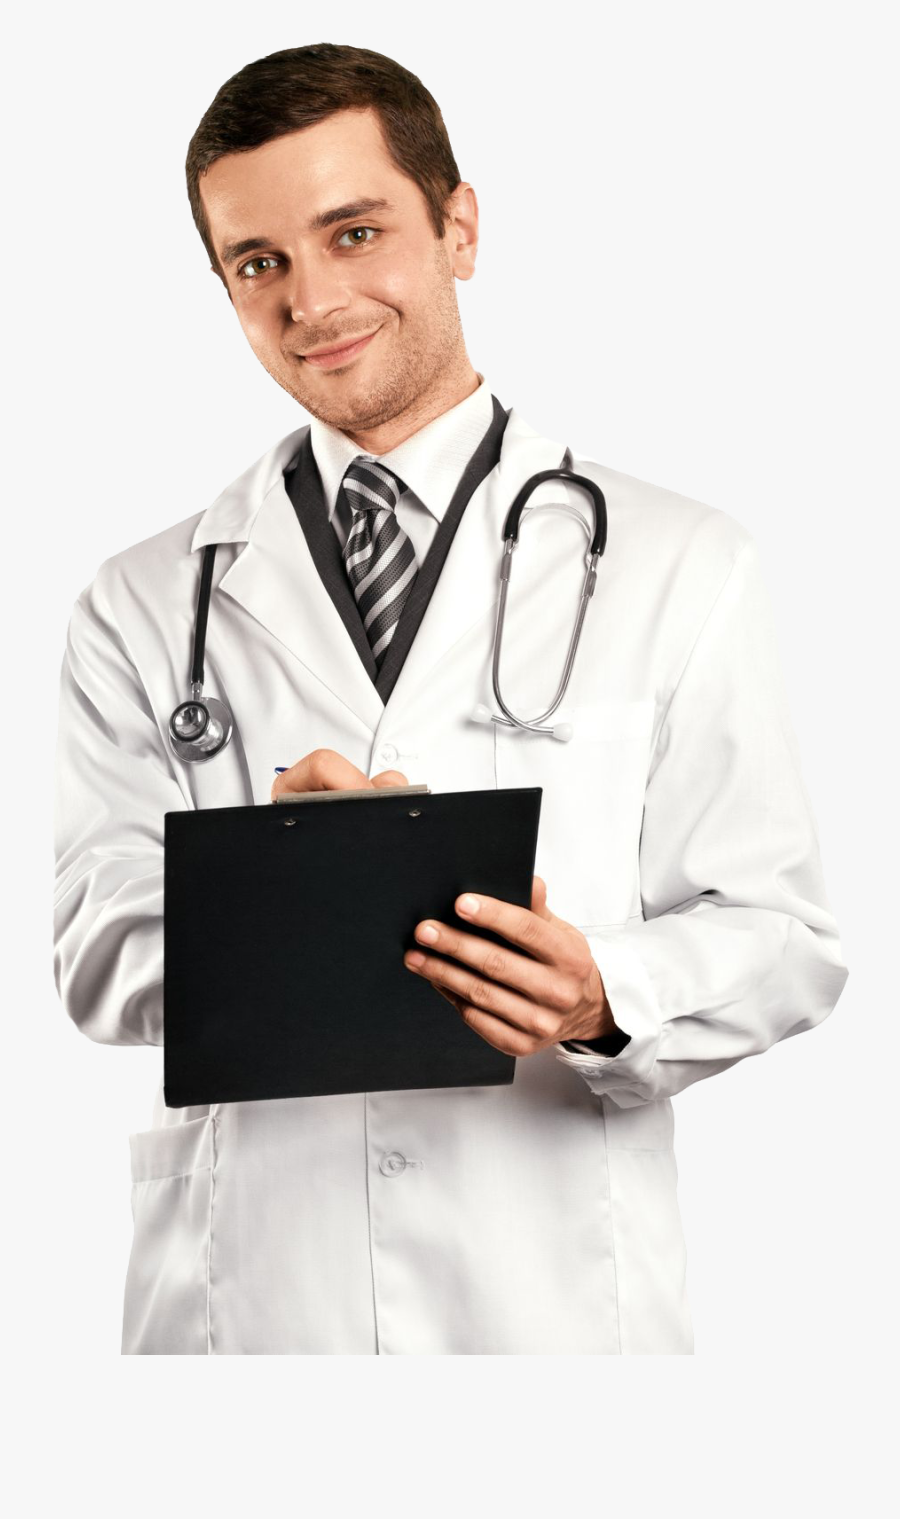 Doctors Png Image - Doctor Images Without Background, Transparent Clipart